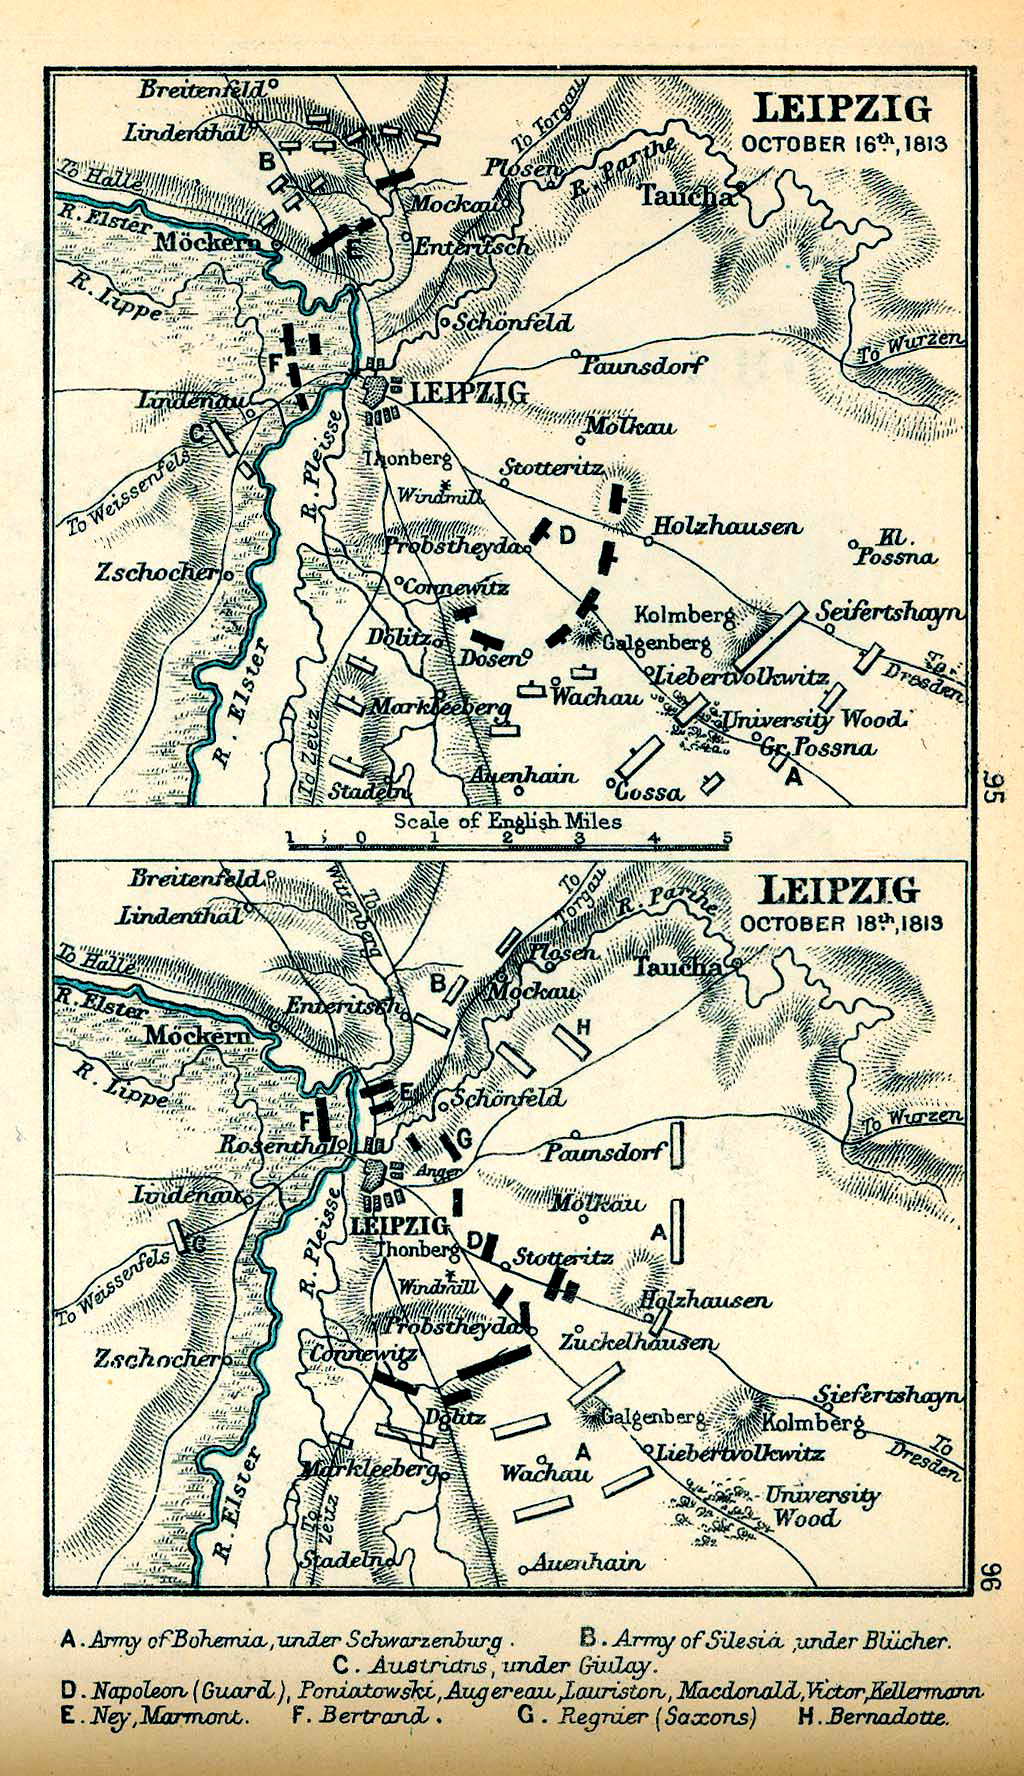 Map of the Battle of Leipzig - October 16-19, 1813